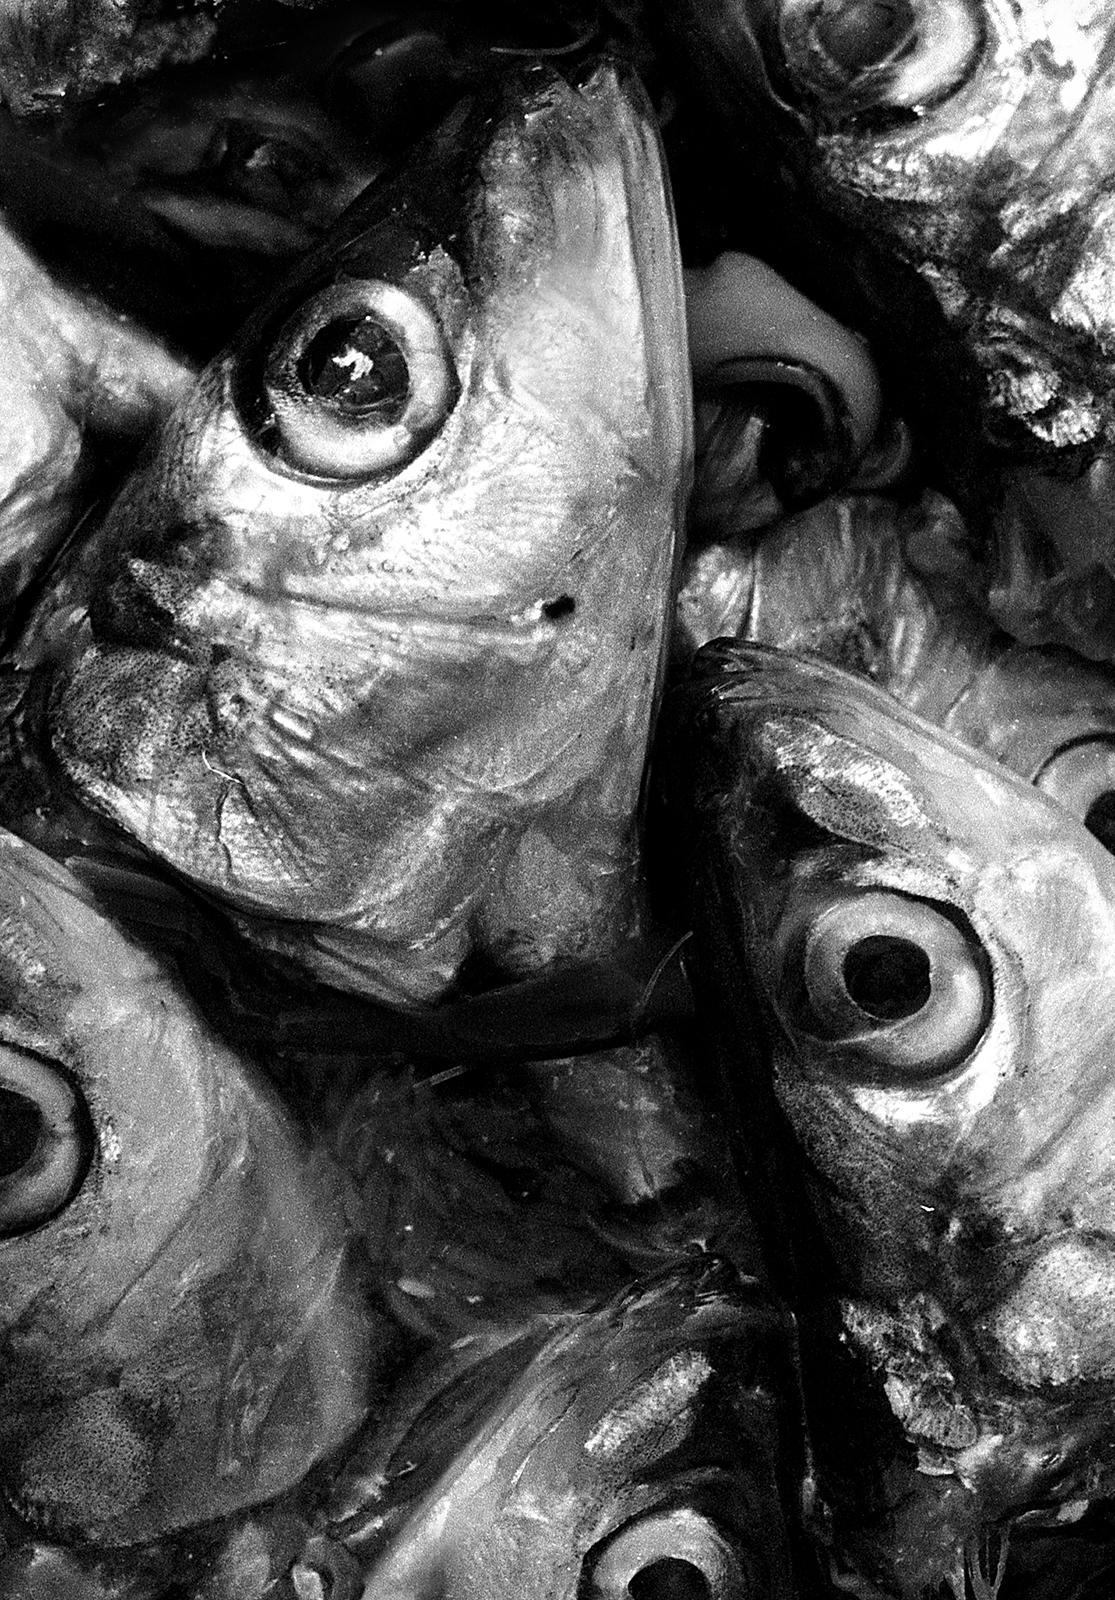 Sardines- Signed limited edition still life print, Black white photo, Nature, Fish - Photograph by Ian Sanderson